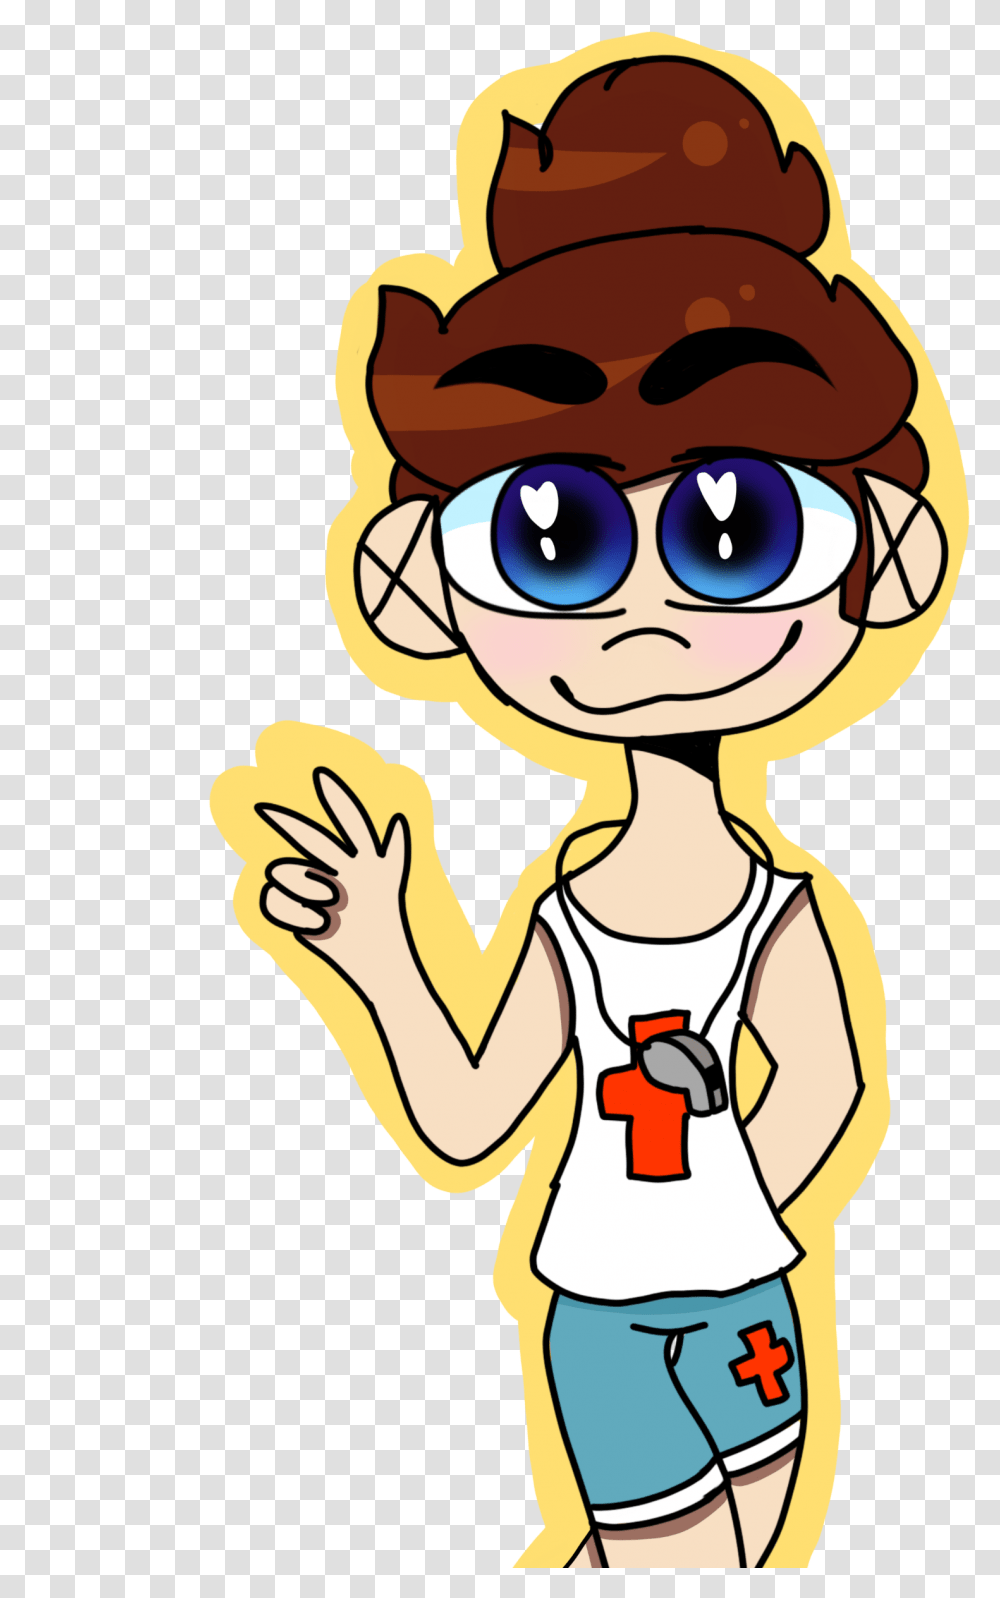 Download Mataeo As A Lifeguard Cartoon Image With No, Sunglasses, Accessories, Accessory, Face Transparent Png